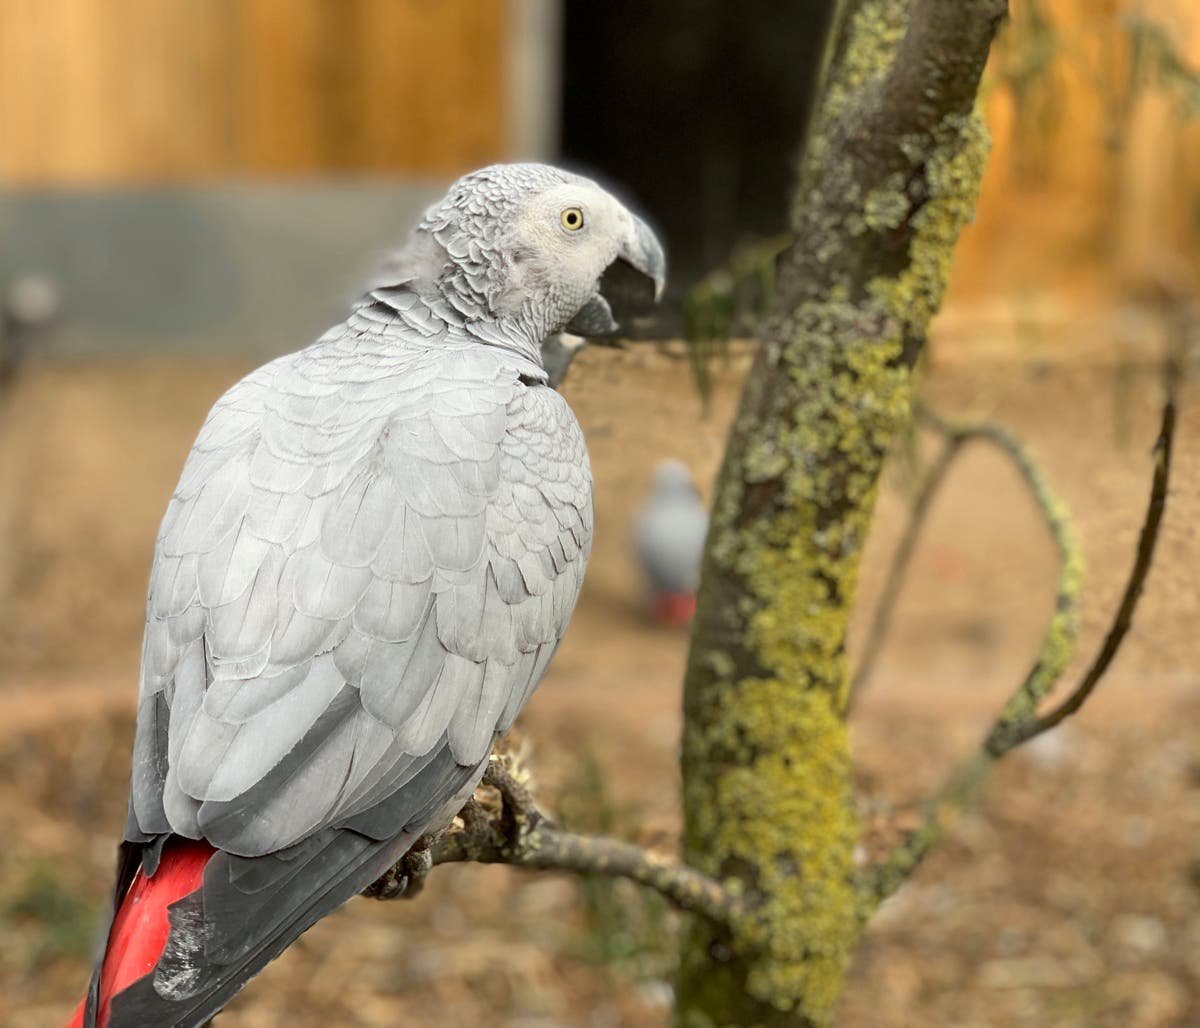 Foul mouthed parrots moved with other birds to curb swearing habit